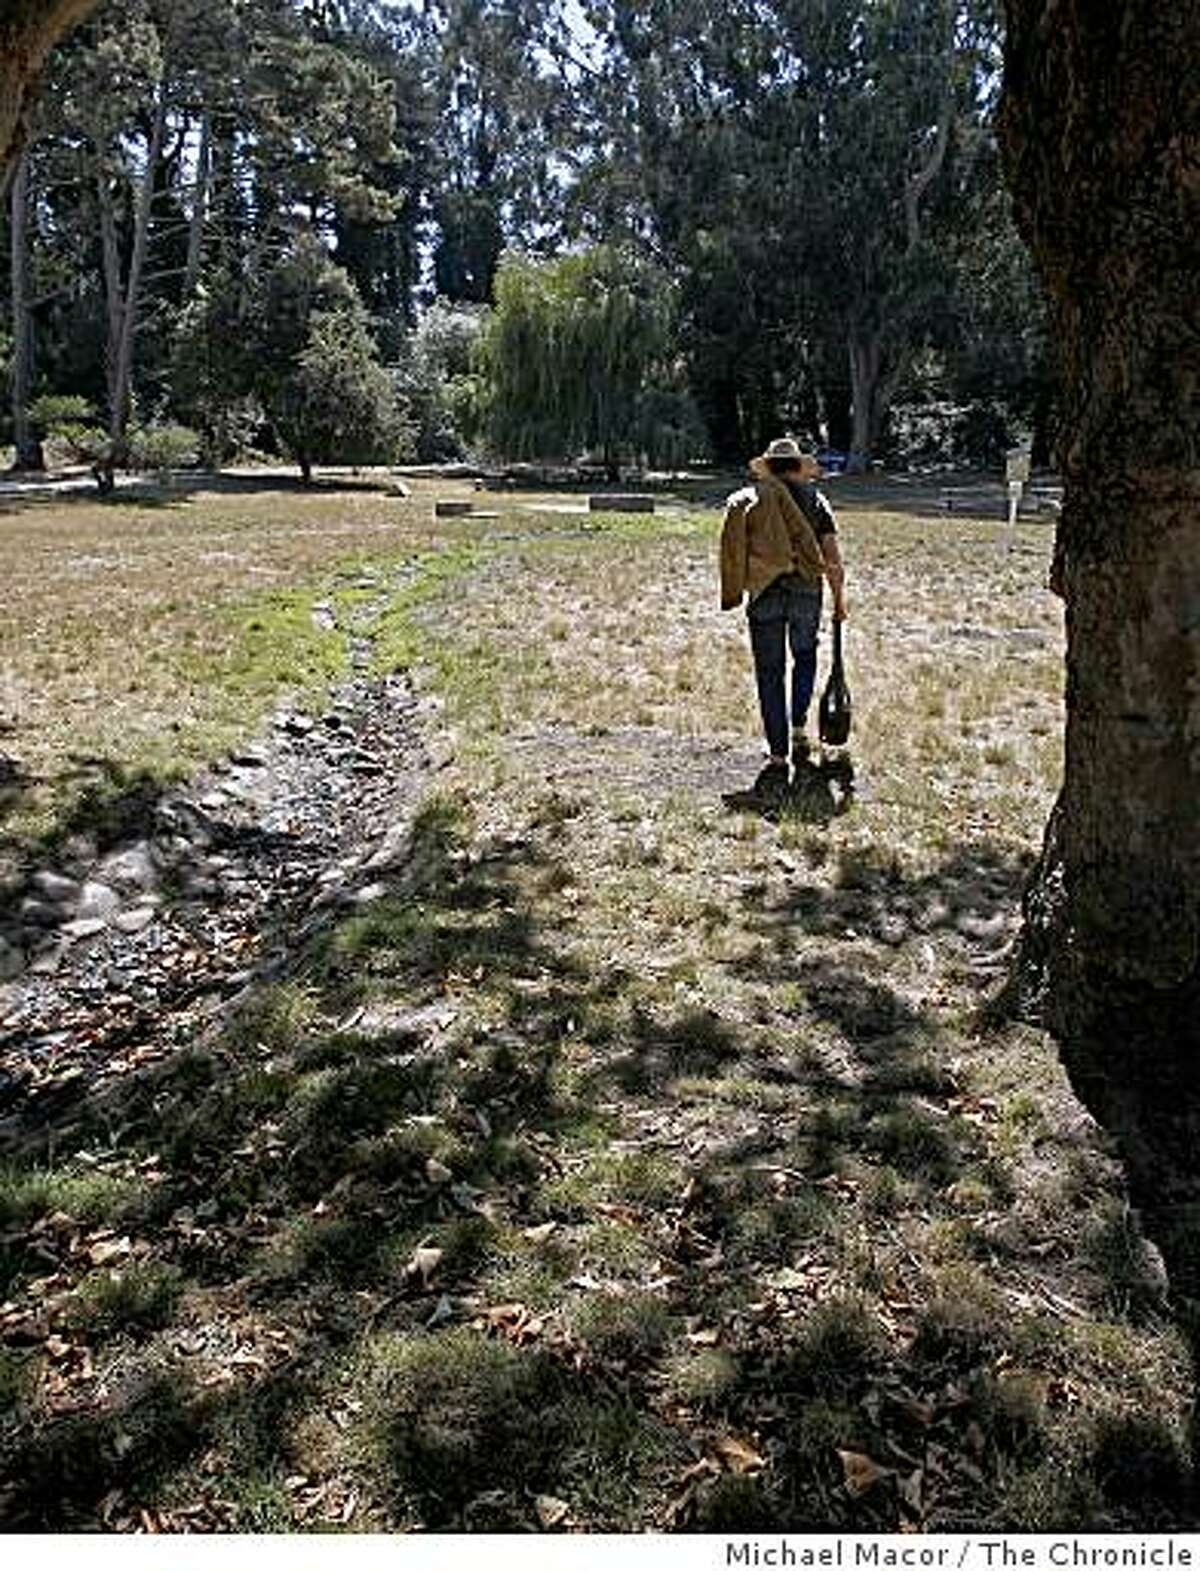 A San Francisco resident walks across the open space of the Tennessee Hollow watershed in the Presidio of San Francisco, Calif. on Sept. 5, 2008 where he enjoys days of watching birds or just relaxing in the surrounding area.